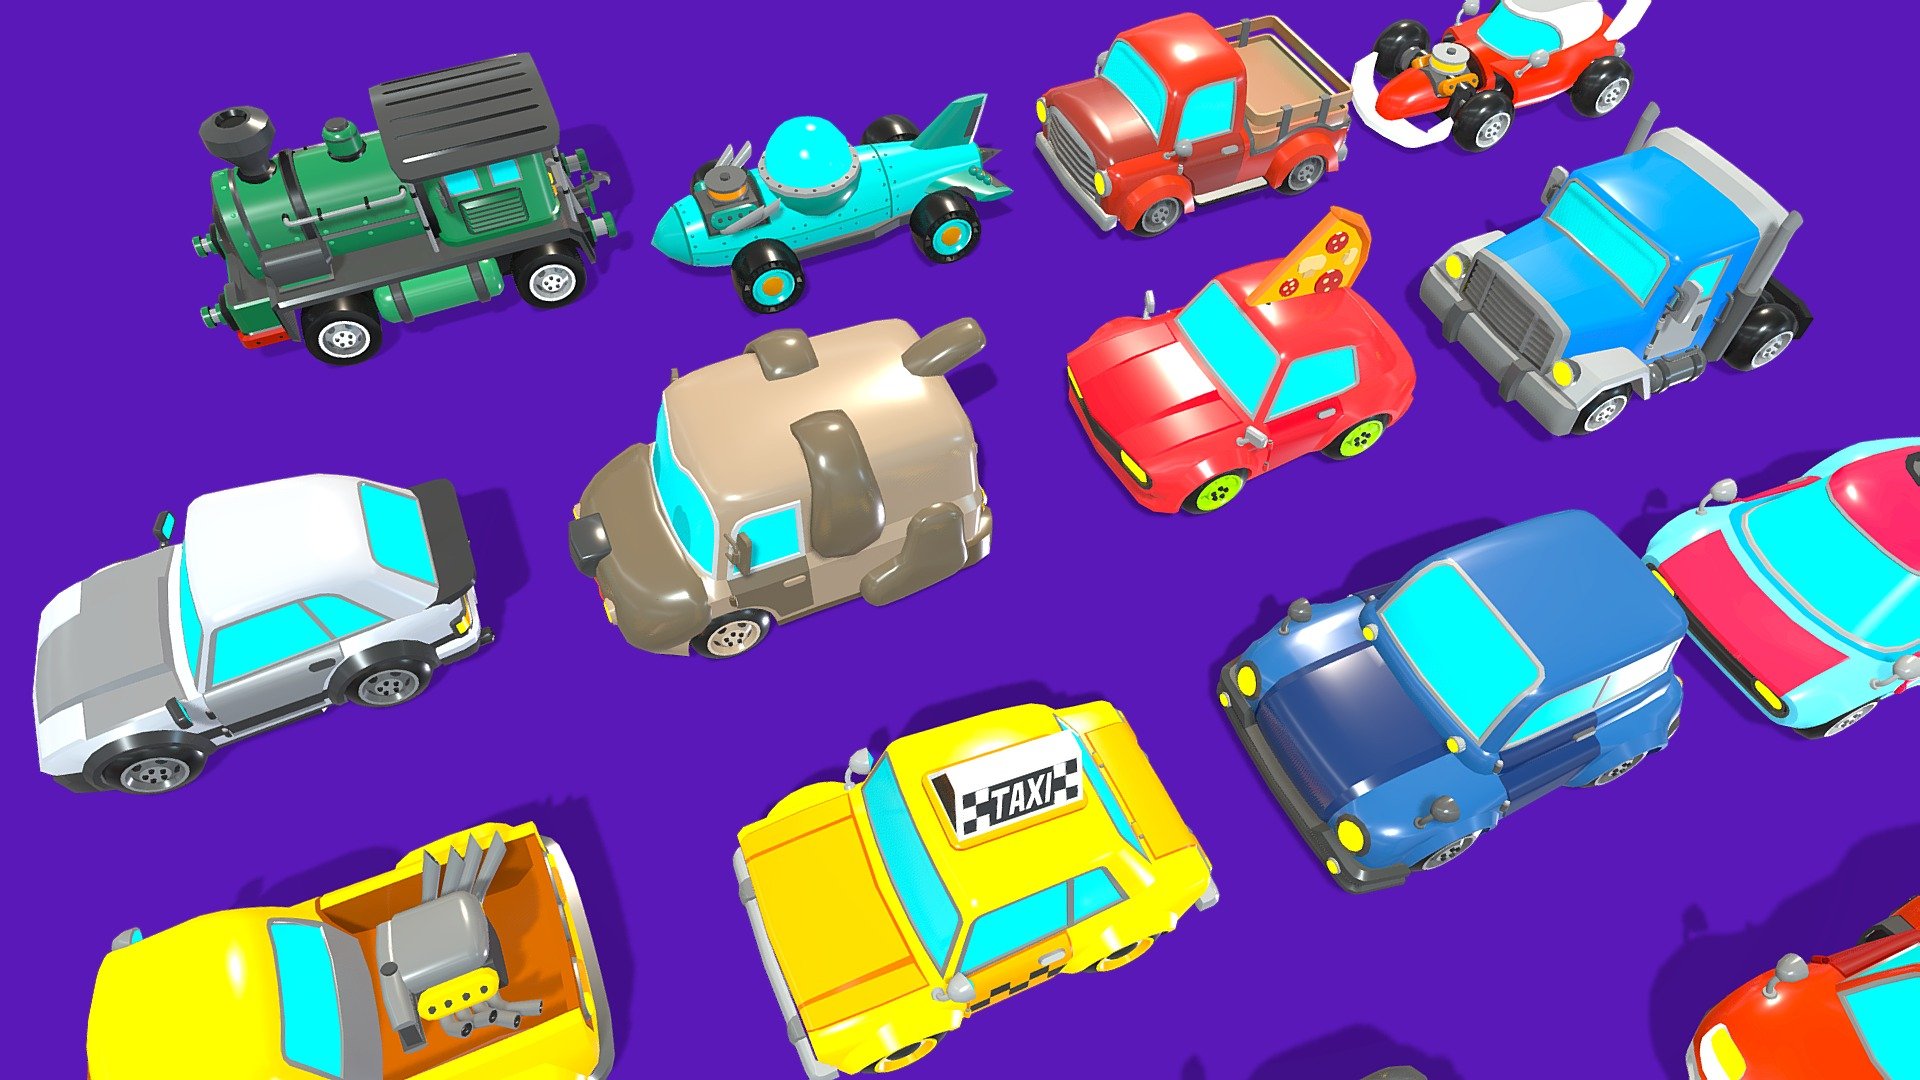 Get ready to add a touch of whimsy and fun to your mobile game projects with our another pack of Low Poly Crazy Stylized Toony Vehicles! This delightful collection features 14 charming and quirky cars, perfect for creating an engaging and visually appealing experience in your hypercasual games.

Unity Package Included: We’ve included a Unity package with these 3D models, streamlining the integration process and saving you valuable development time.

Give your mobile game the visual flair it deserves with our Low Poly Stylized Toony Vehicles Pack. Whether you’re a seasoned game developer or just starting, this asset will help you create a captivating and memorable gaming experience that players won’t be able to resist.

Start your journey to mobile gaming success today! Download our Low Poly Crazy Stylize Vehicles Pack and inject a dose of cuteness into your hypercasual games 3d model